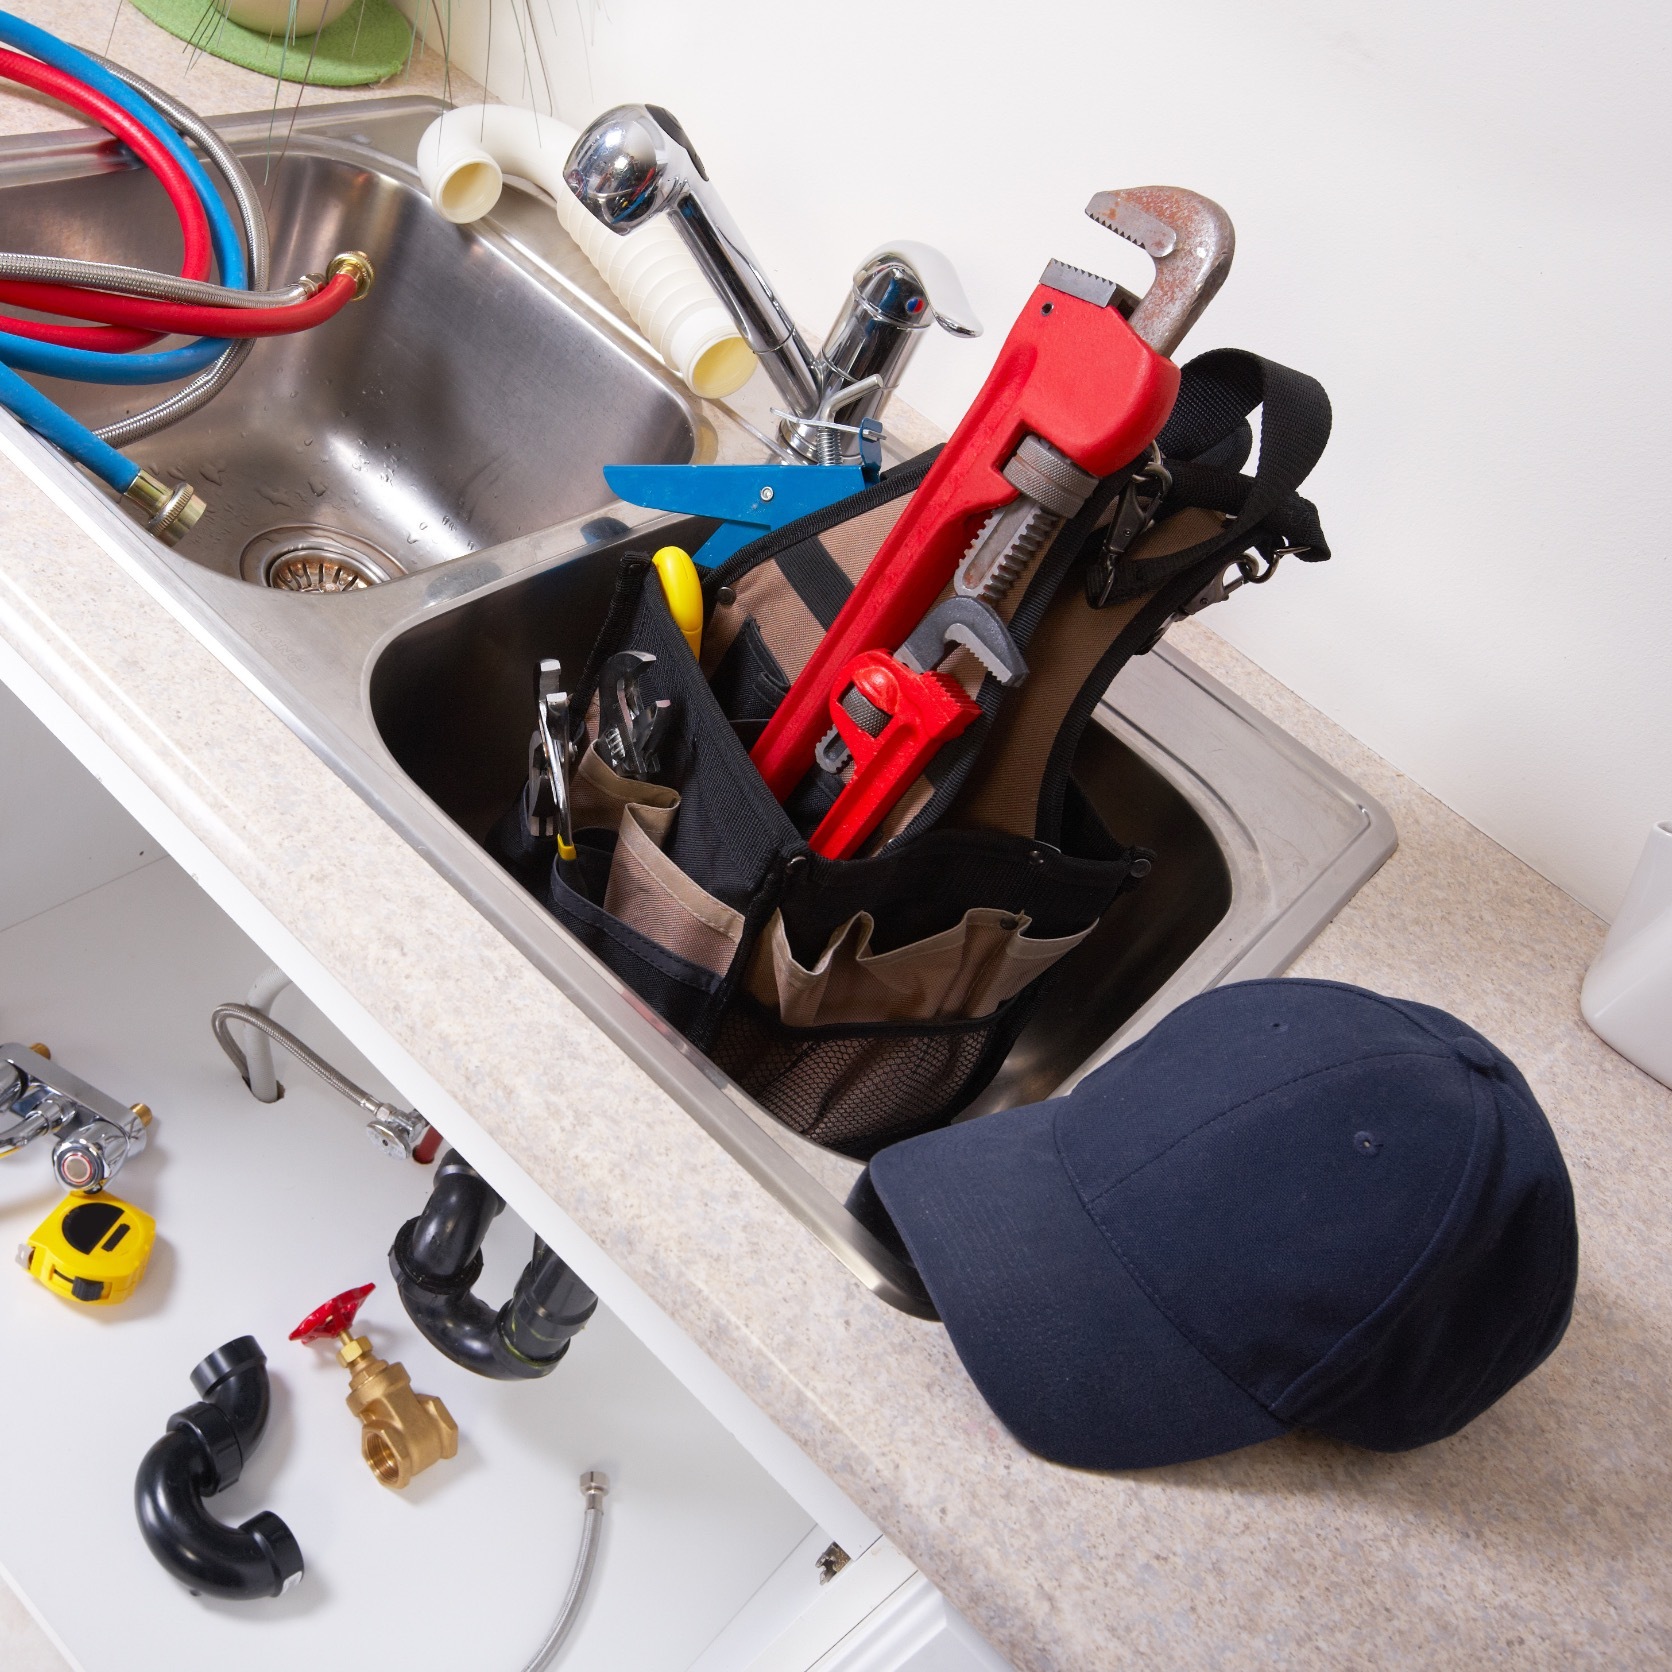 plumbing tools and hat near a sink